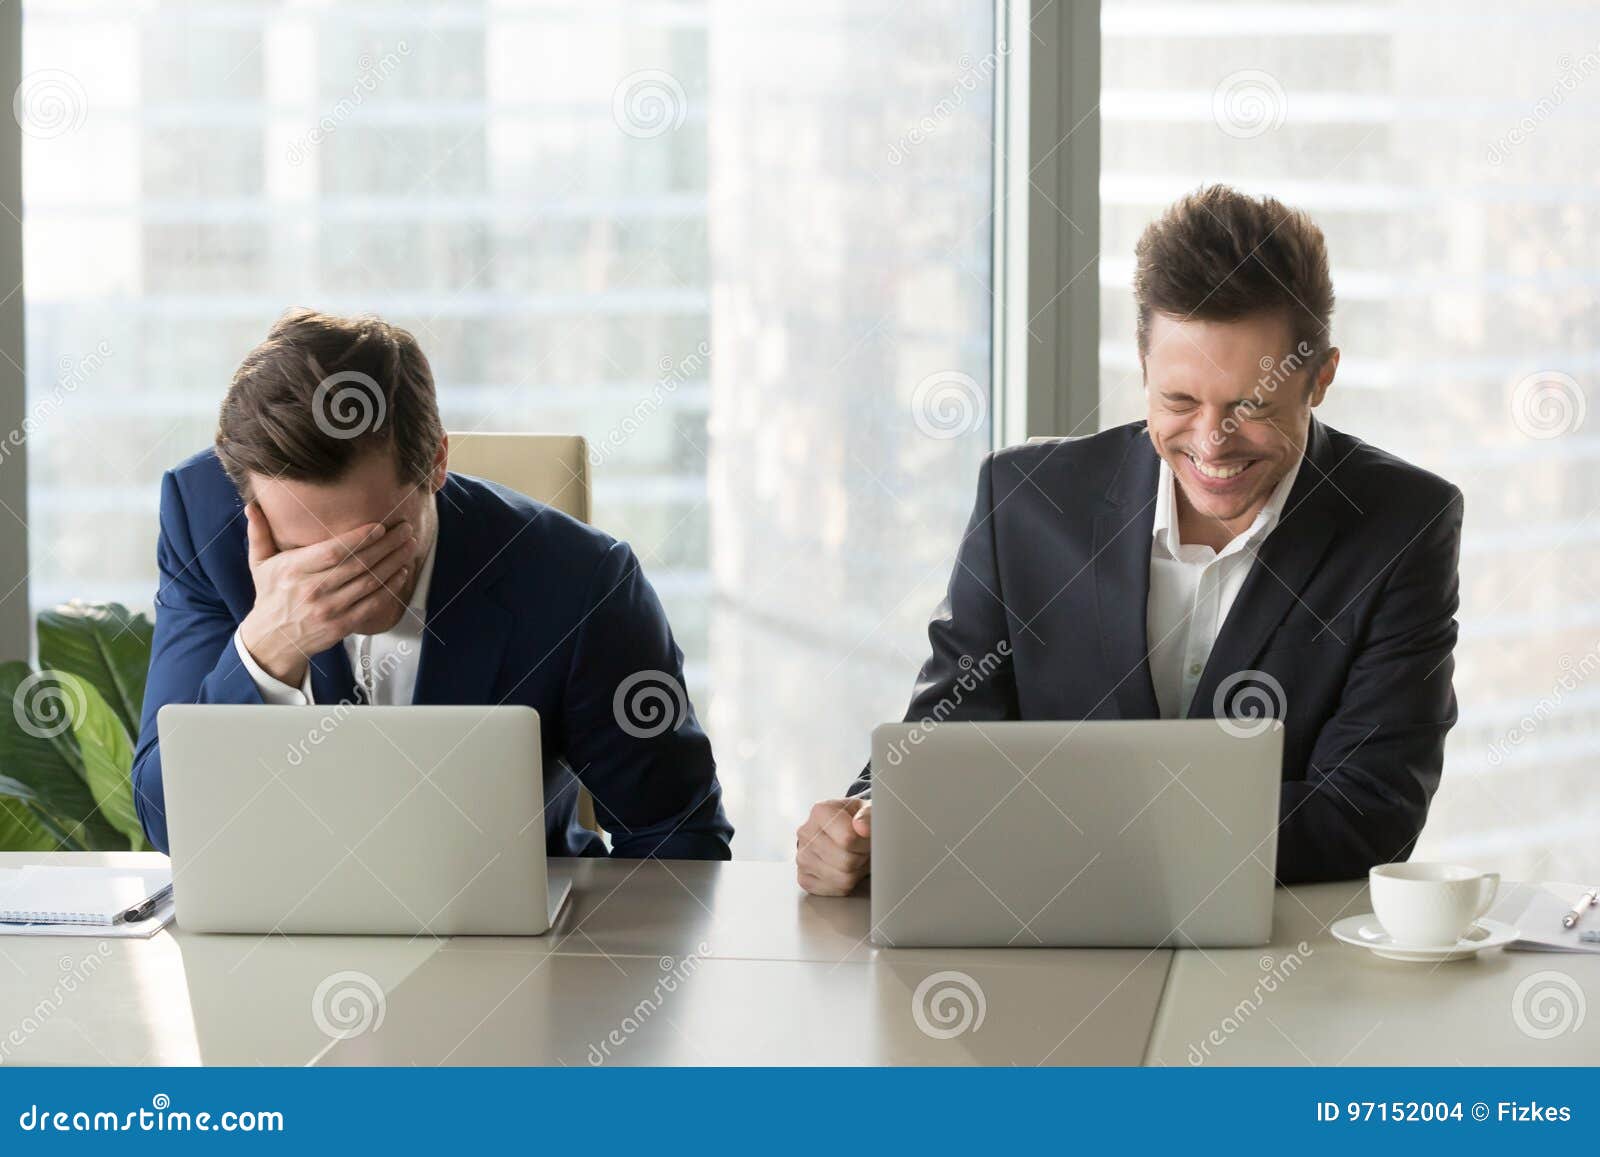 two businessmen laughing out loud, good positive emotions at wor